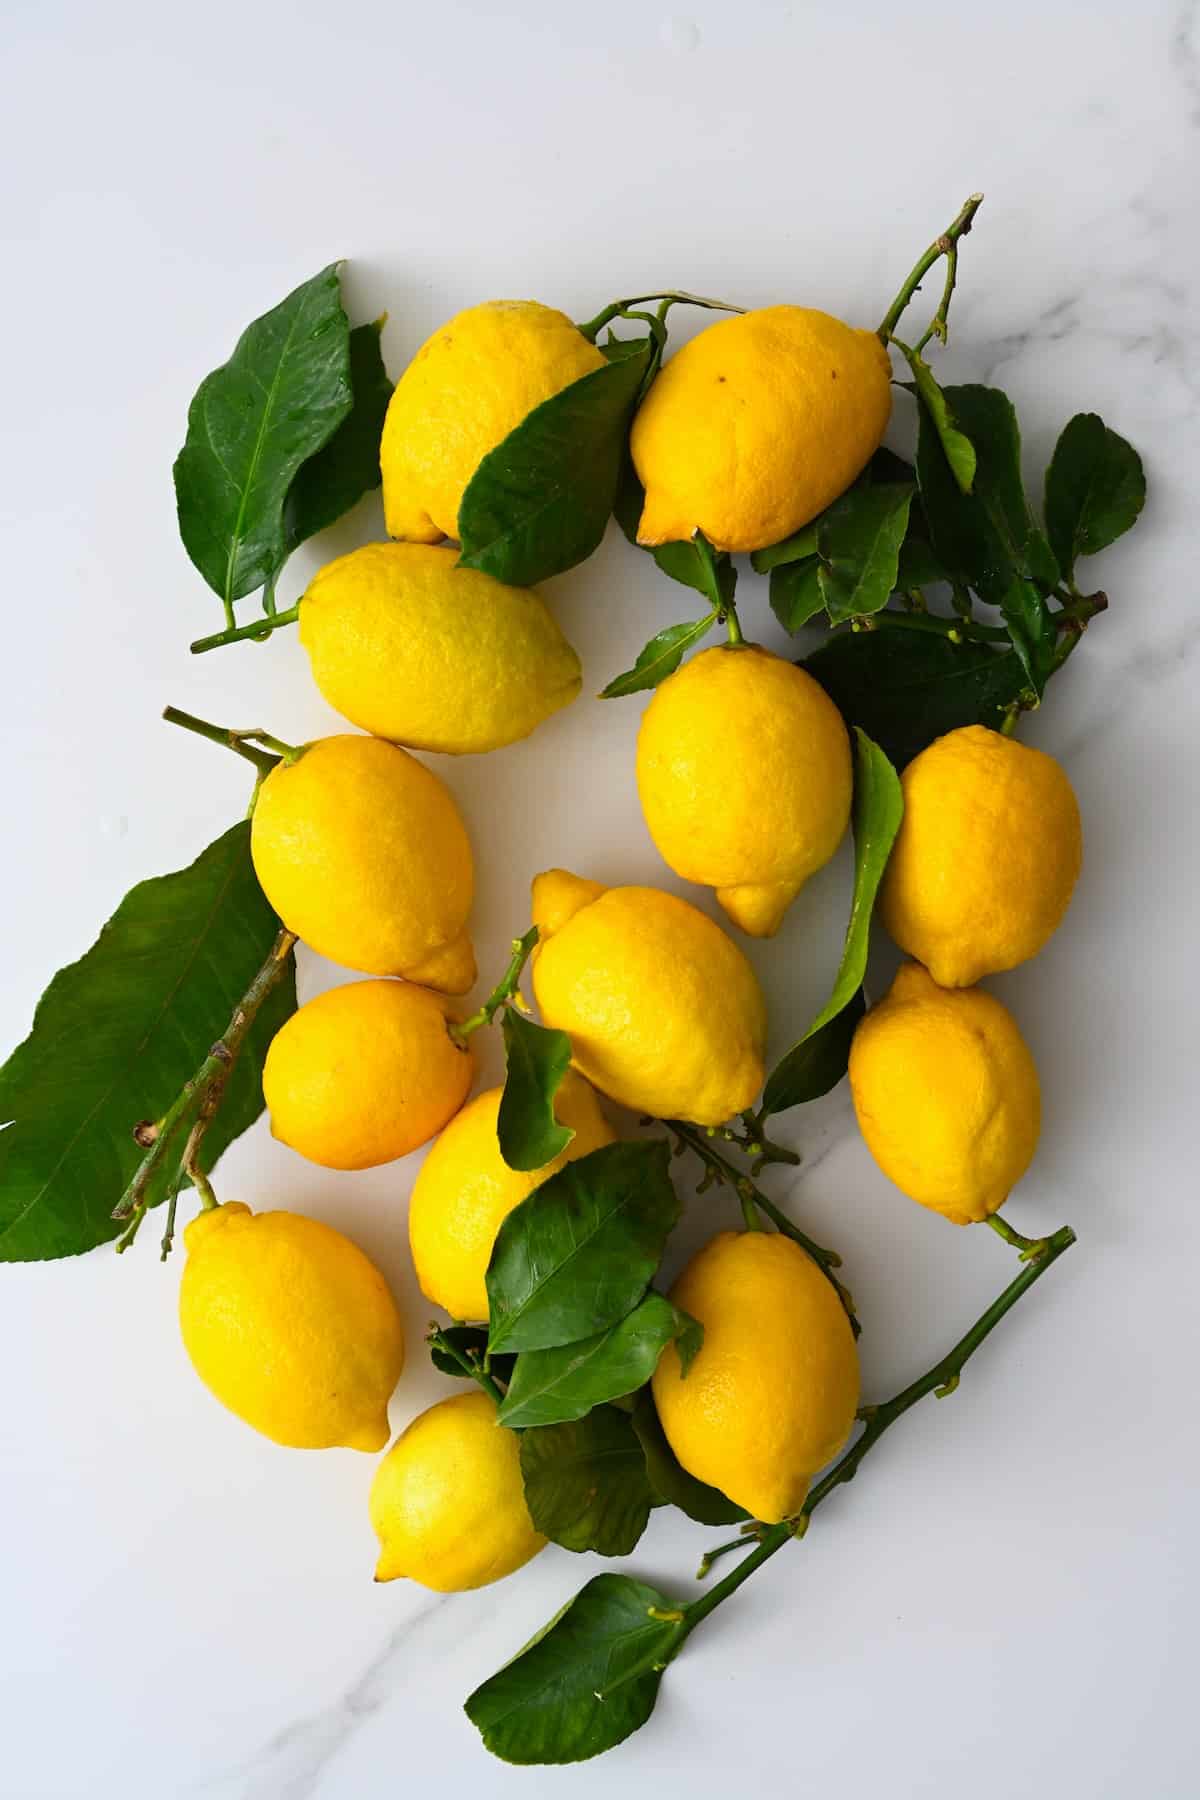 Thrirtheen lemons with leaves on a flat surface